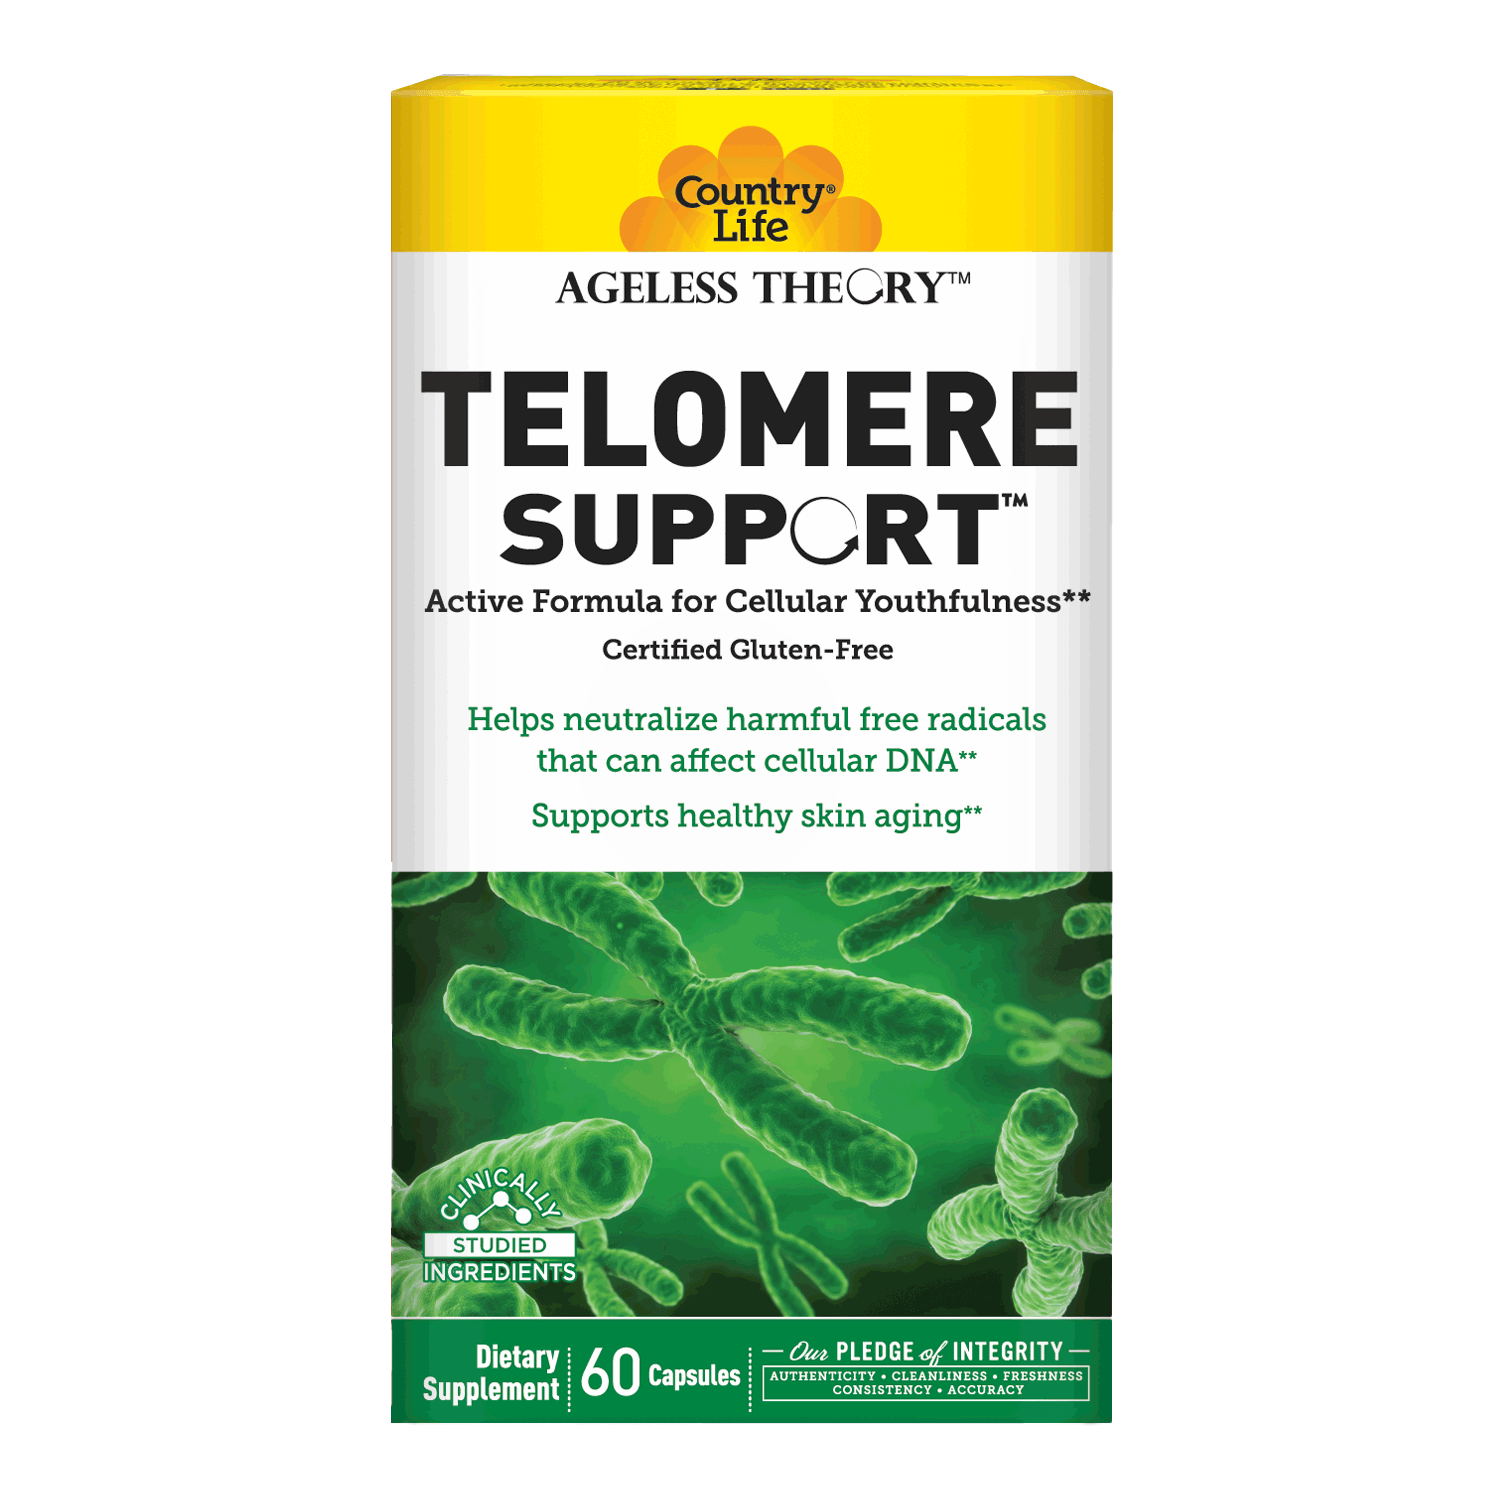 A photo of the Ageless Theory Telomere Support packaging